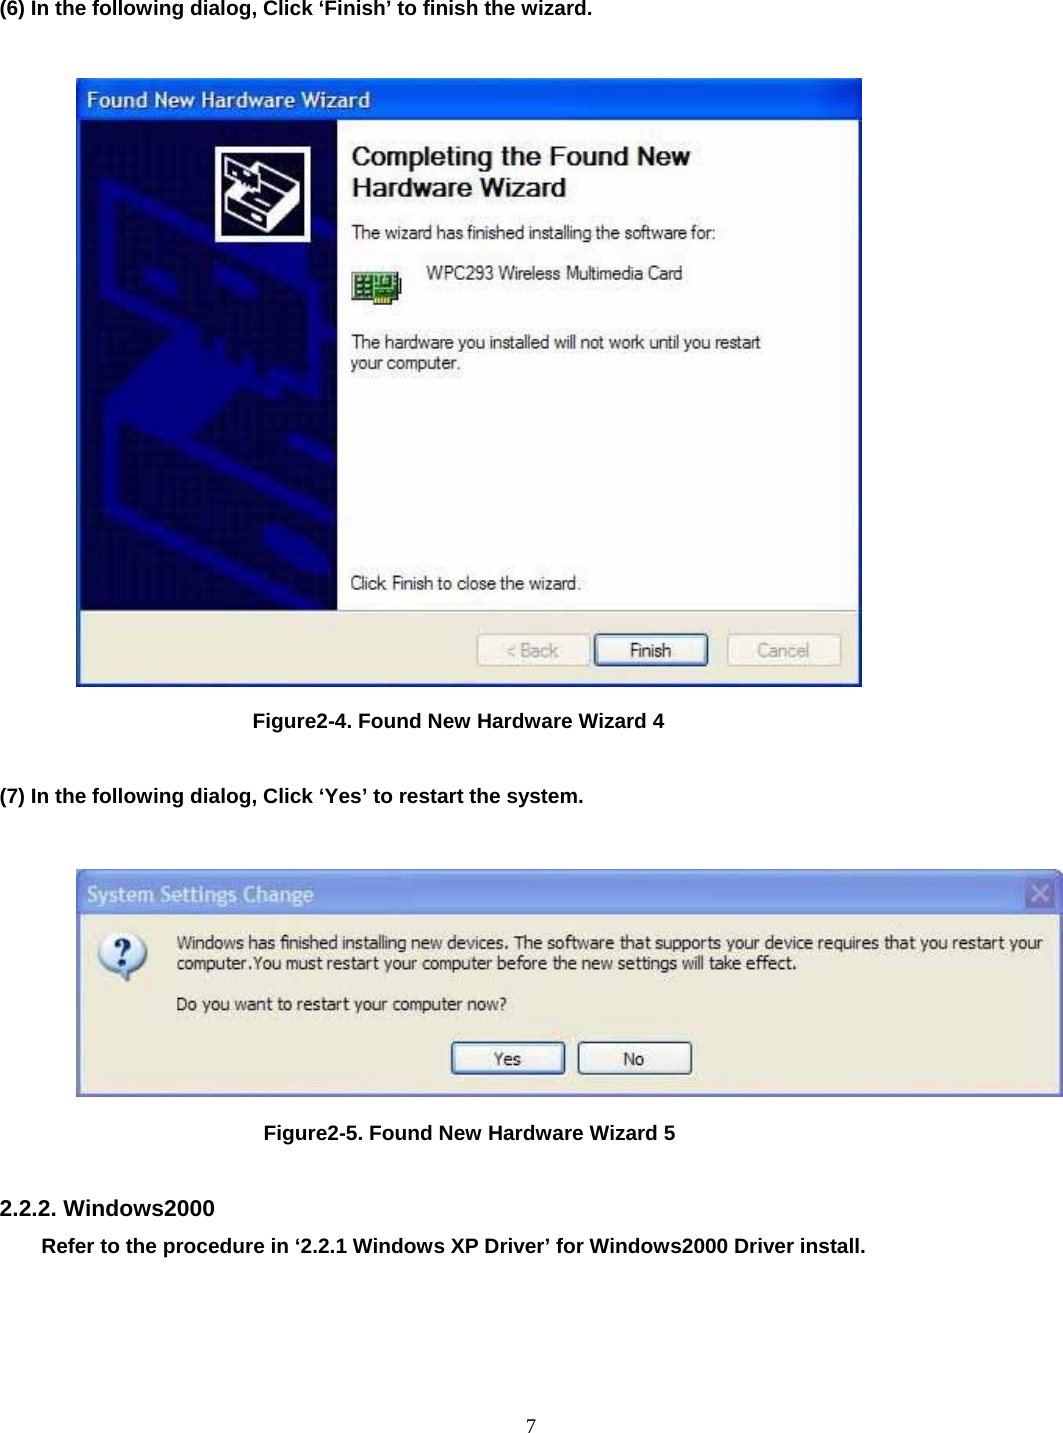    (6) In the following dialog, Click ‘Finish’ to finish the wizard.                                  Figure2-4. Found New Hardware Wizard 4  (7) In the following dialog, Click ‘Yes’ to restart the system.                                   Figure2-5. Found New Hardware Wizard 5  2.2.2. Windows2000 Refer to the procedure in ‘2.2.1 Windows XP Driver’ for Windows2000 Driver install.       7